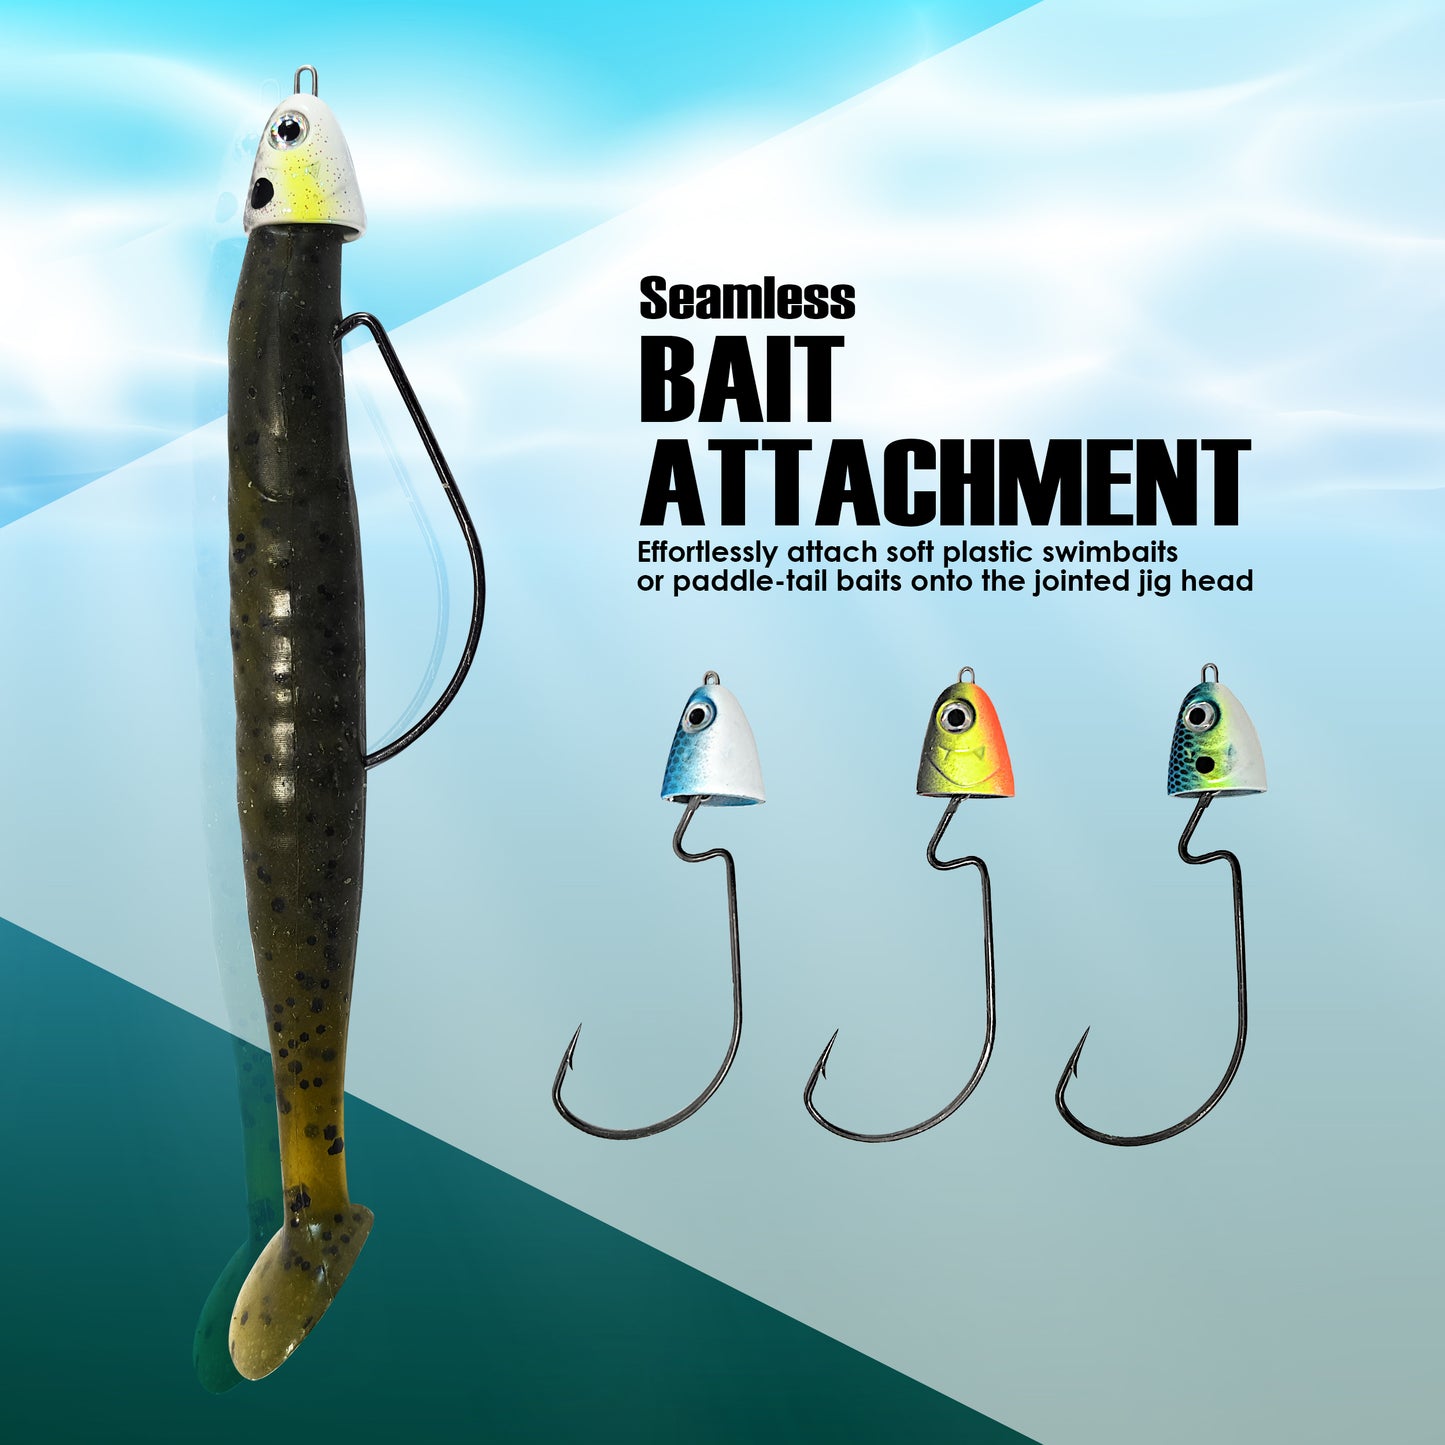  Reaction Tackle Tungsten Swimbait Jig Heads - 3D Realistic  Eyes Attract Bass And More- Swim Bait Jig Head For Use